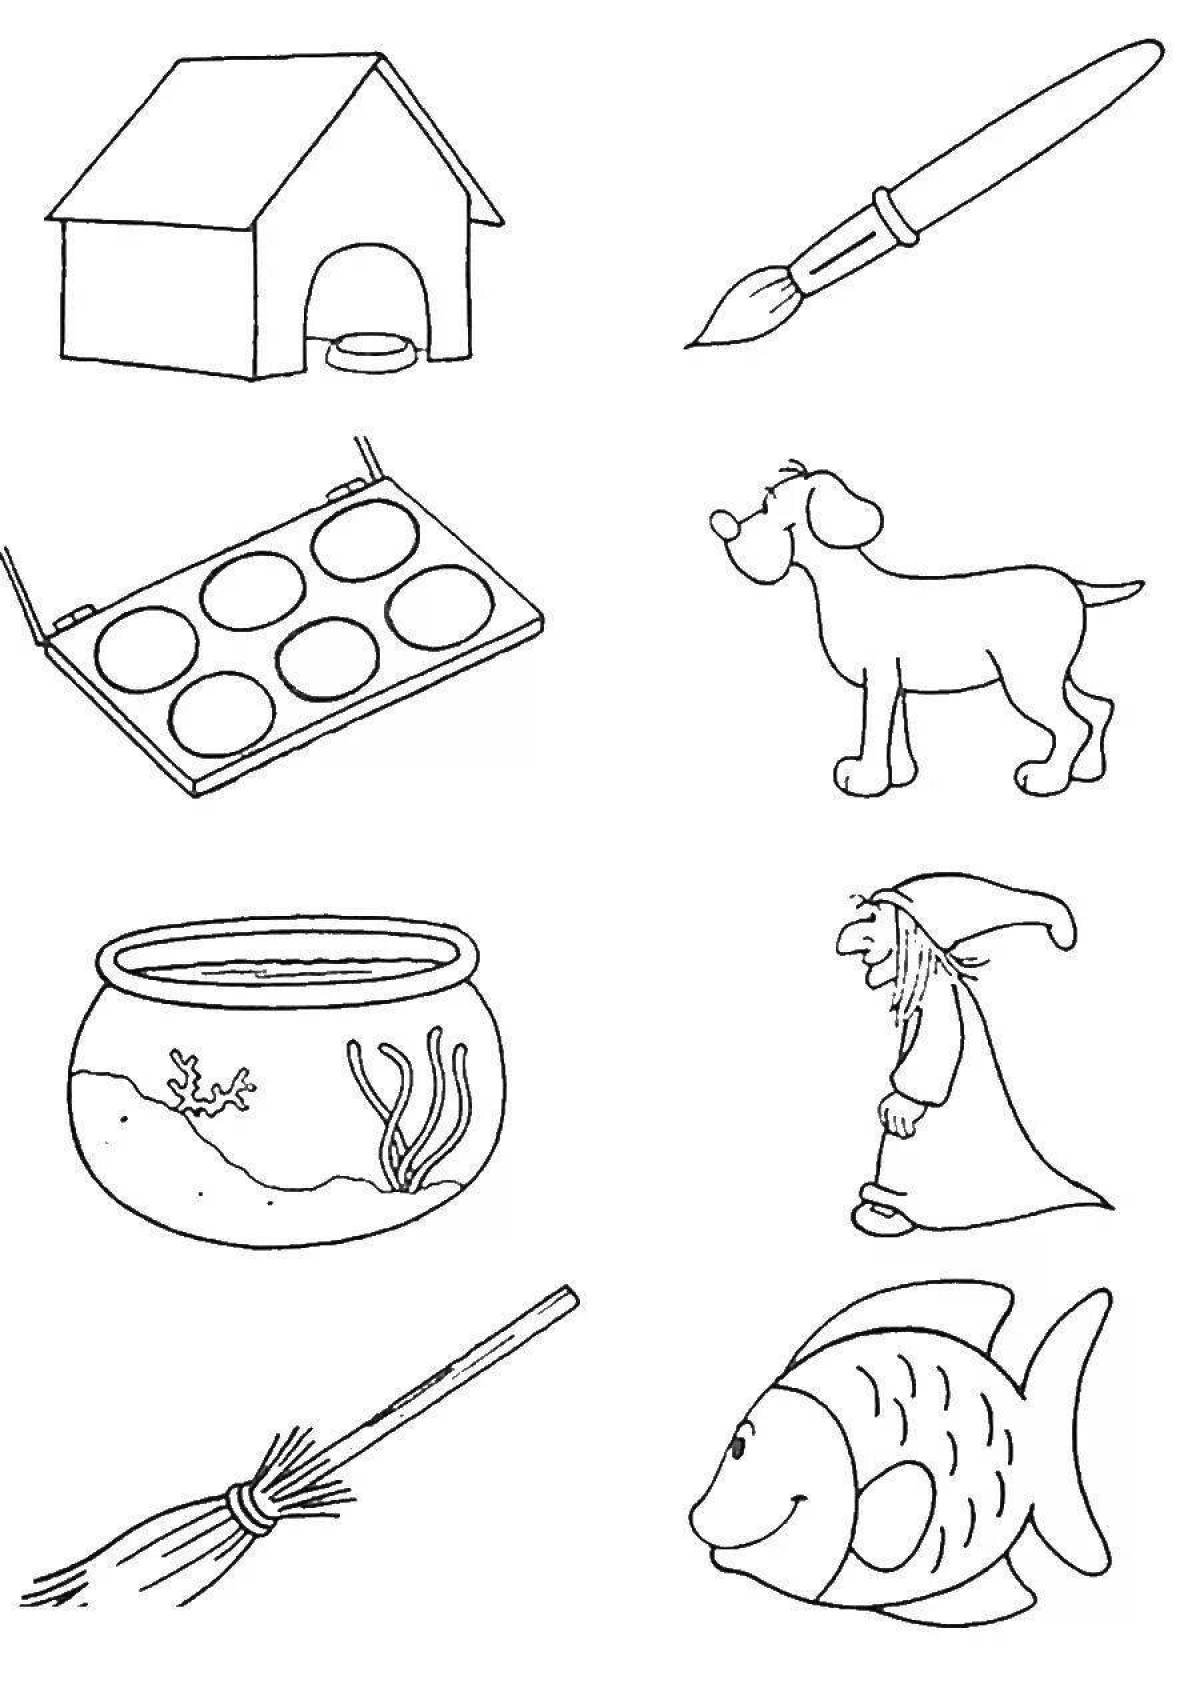 Innovative logical coloring book for 3-4 year olds